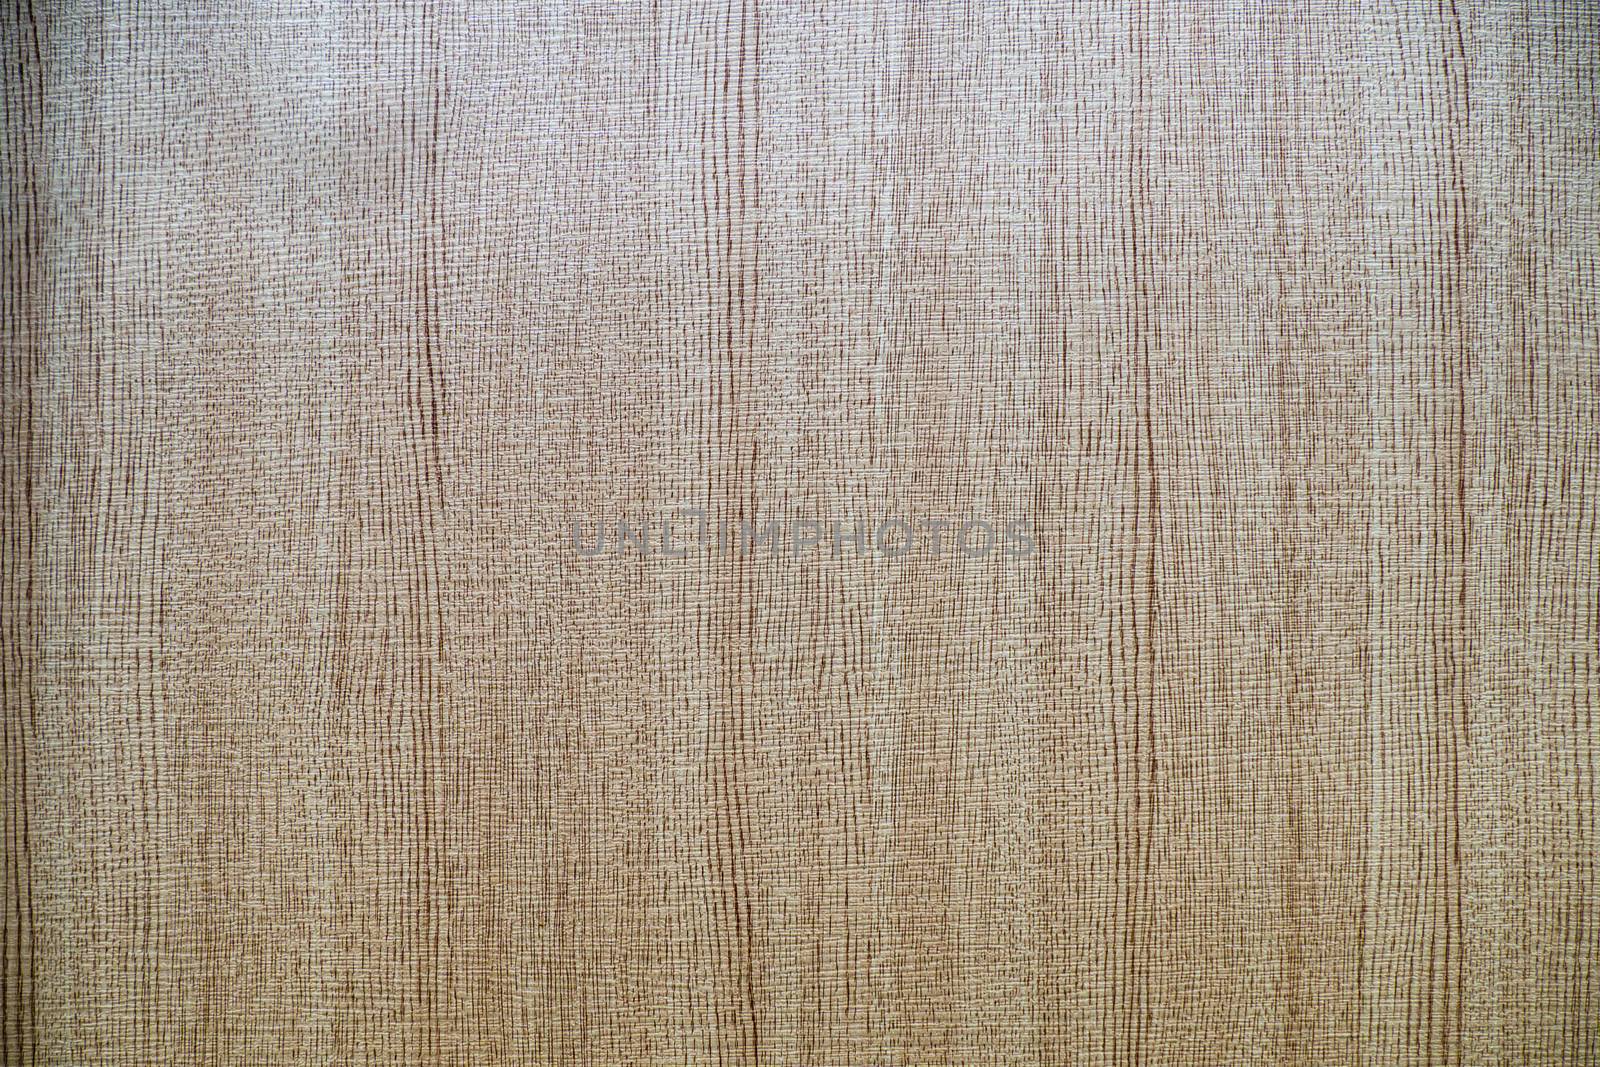 Wooden Pattern Texture, Wood Background Surface Pattern